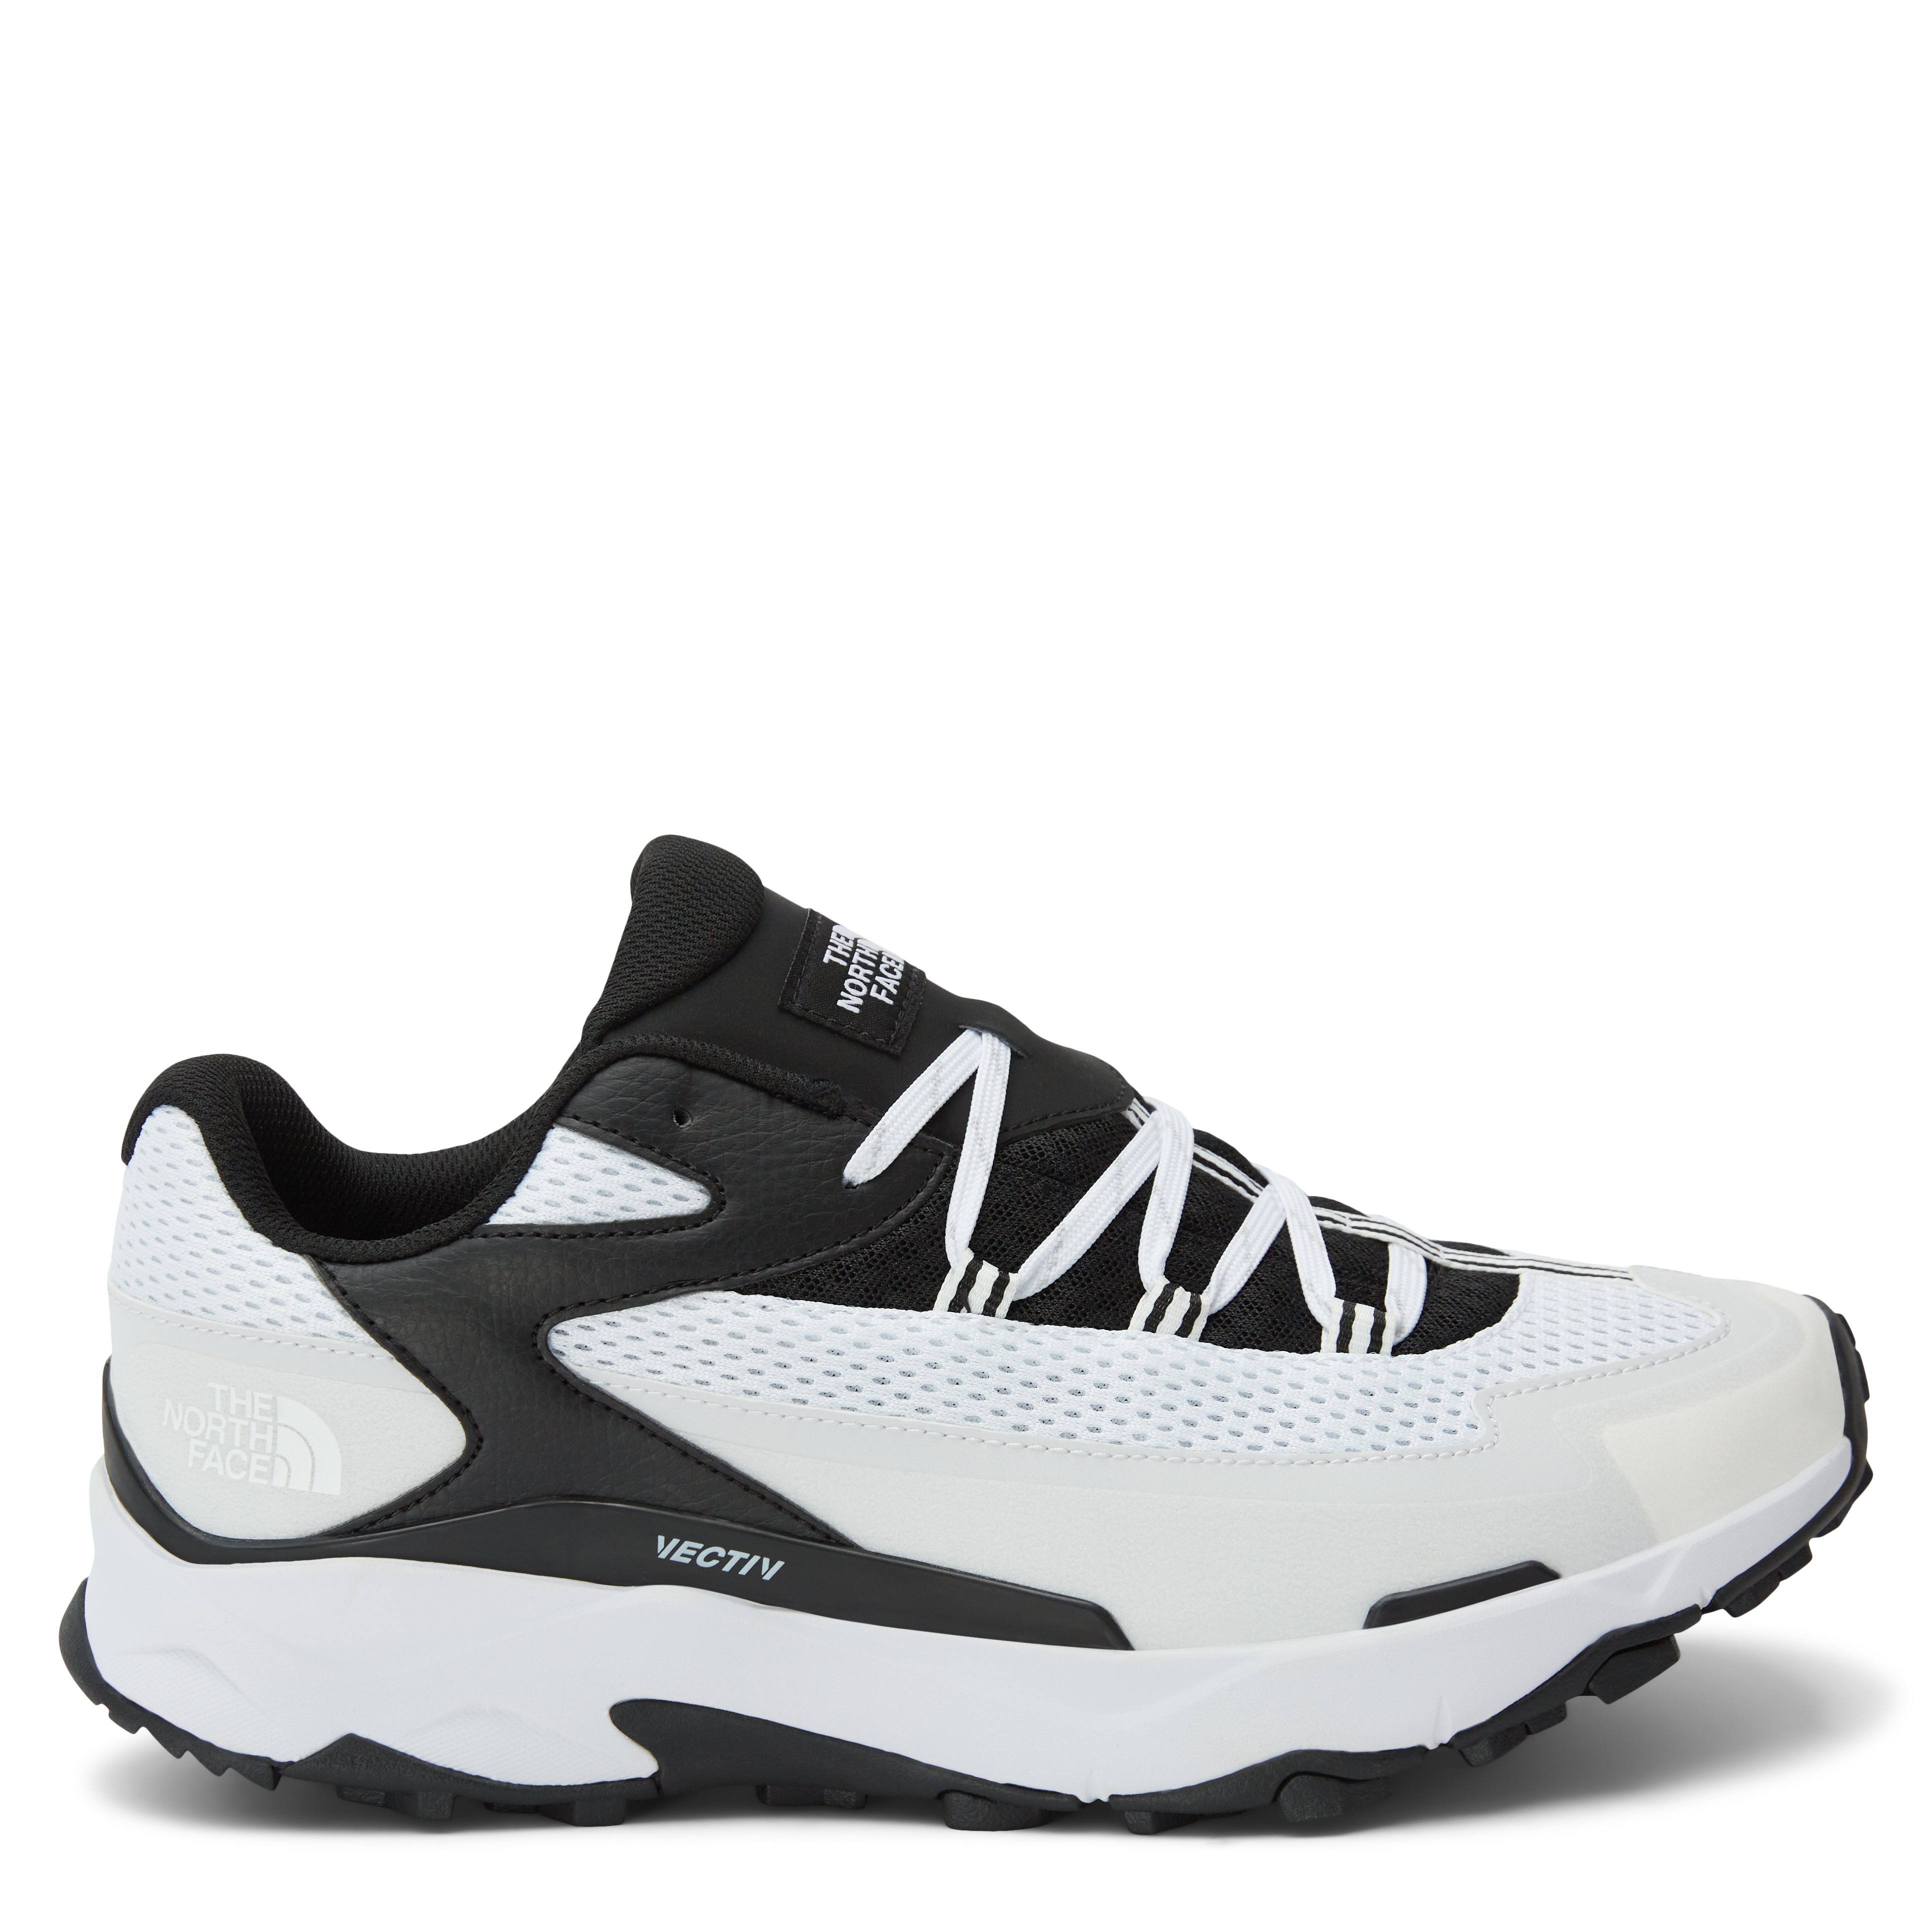 The North Face Shoes VECTIV TARAVAL NF0A52Q1LG51 2303 White